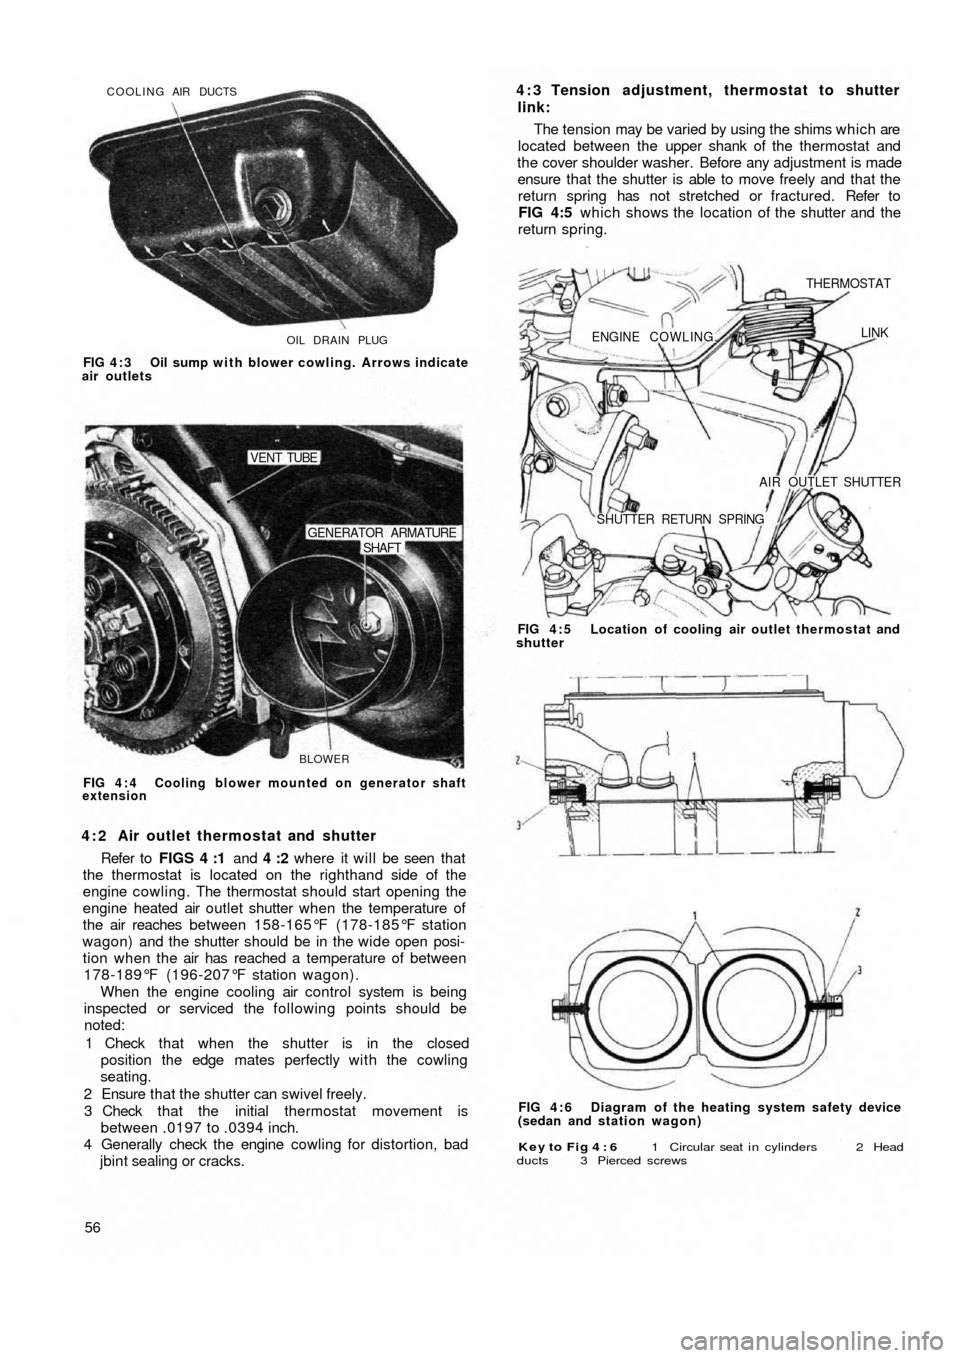 FIAT 500 1968 1.G Service Manual OIL DRAIN PLUG COOLING AIR DUCTS
FIG 4 : 3  Oil sump with blower cowling. Arrows indicate
air outlets
BLOWER
SHAFT GENERATOR ARMATURE
VENT TUBE
FIG 4 : 4  Cooling blower mounted on generator shaft
ext